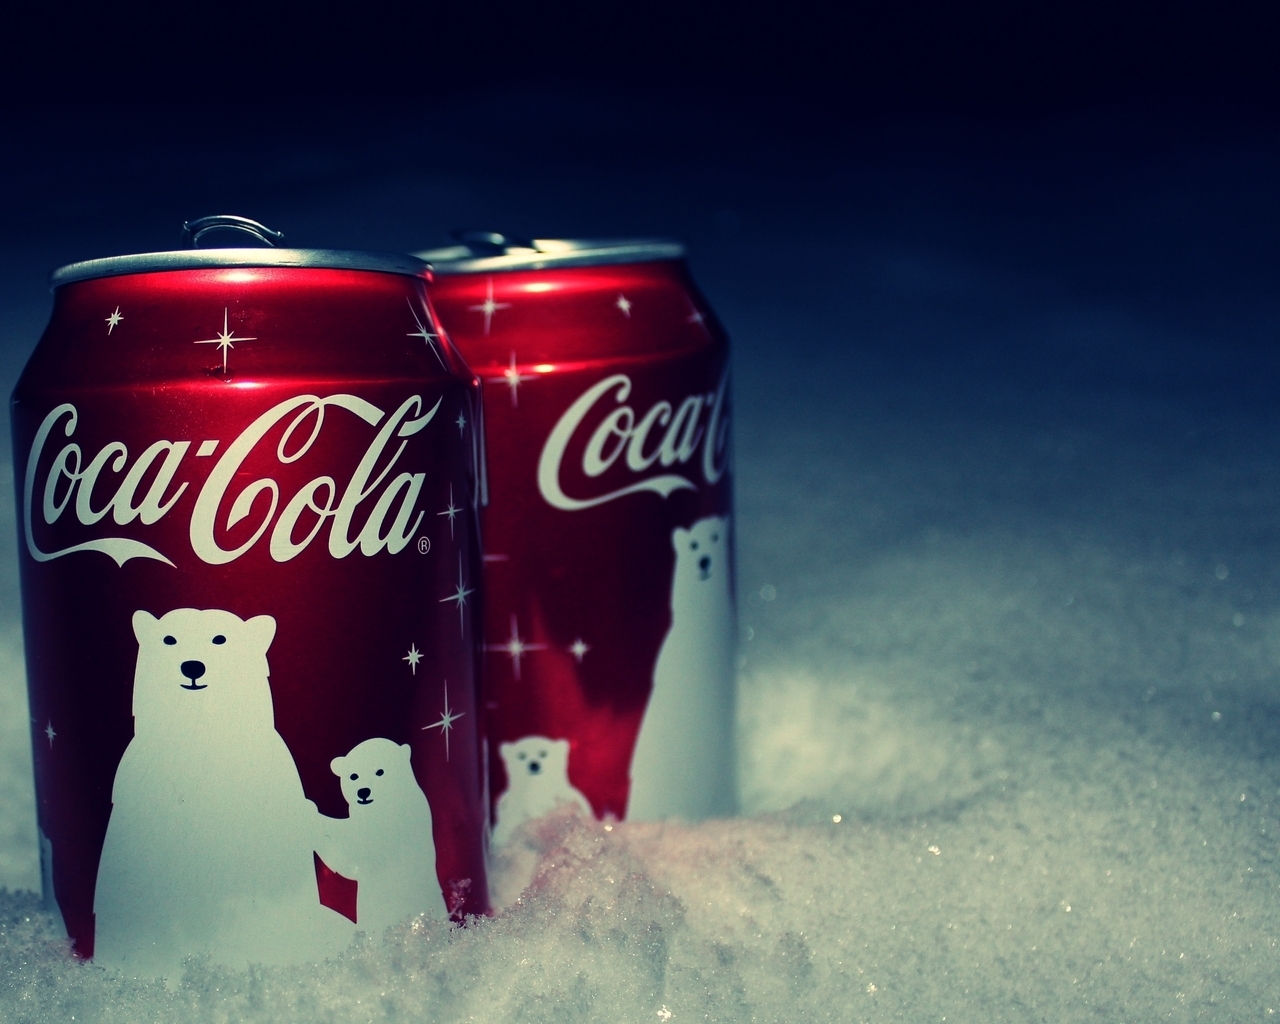 CocaCola for Christmas for 1280 x 1024 resolution